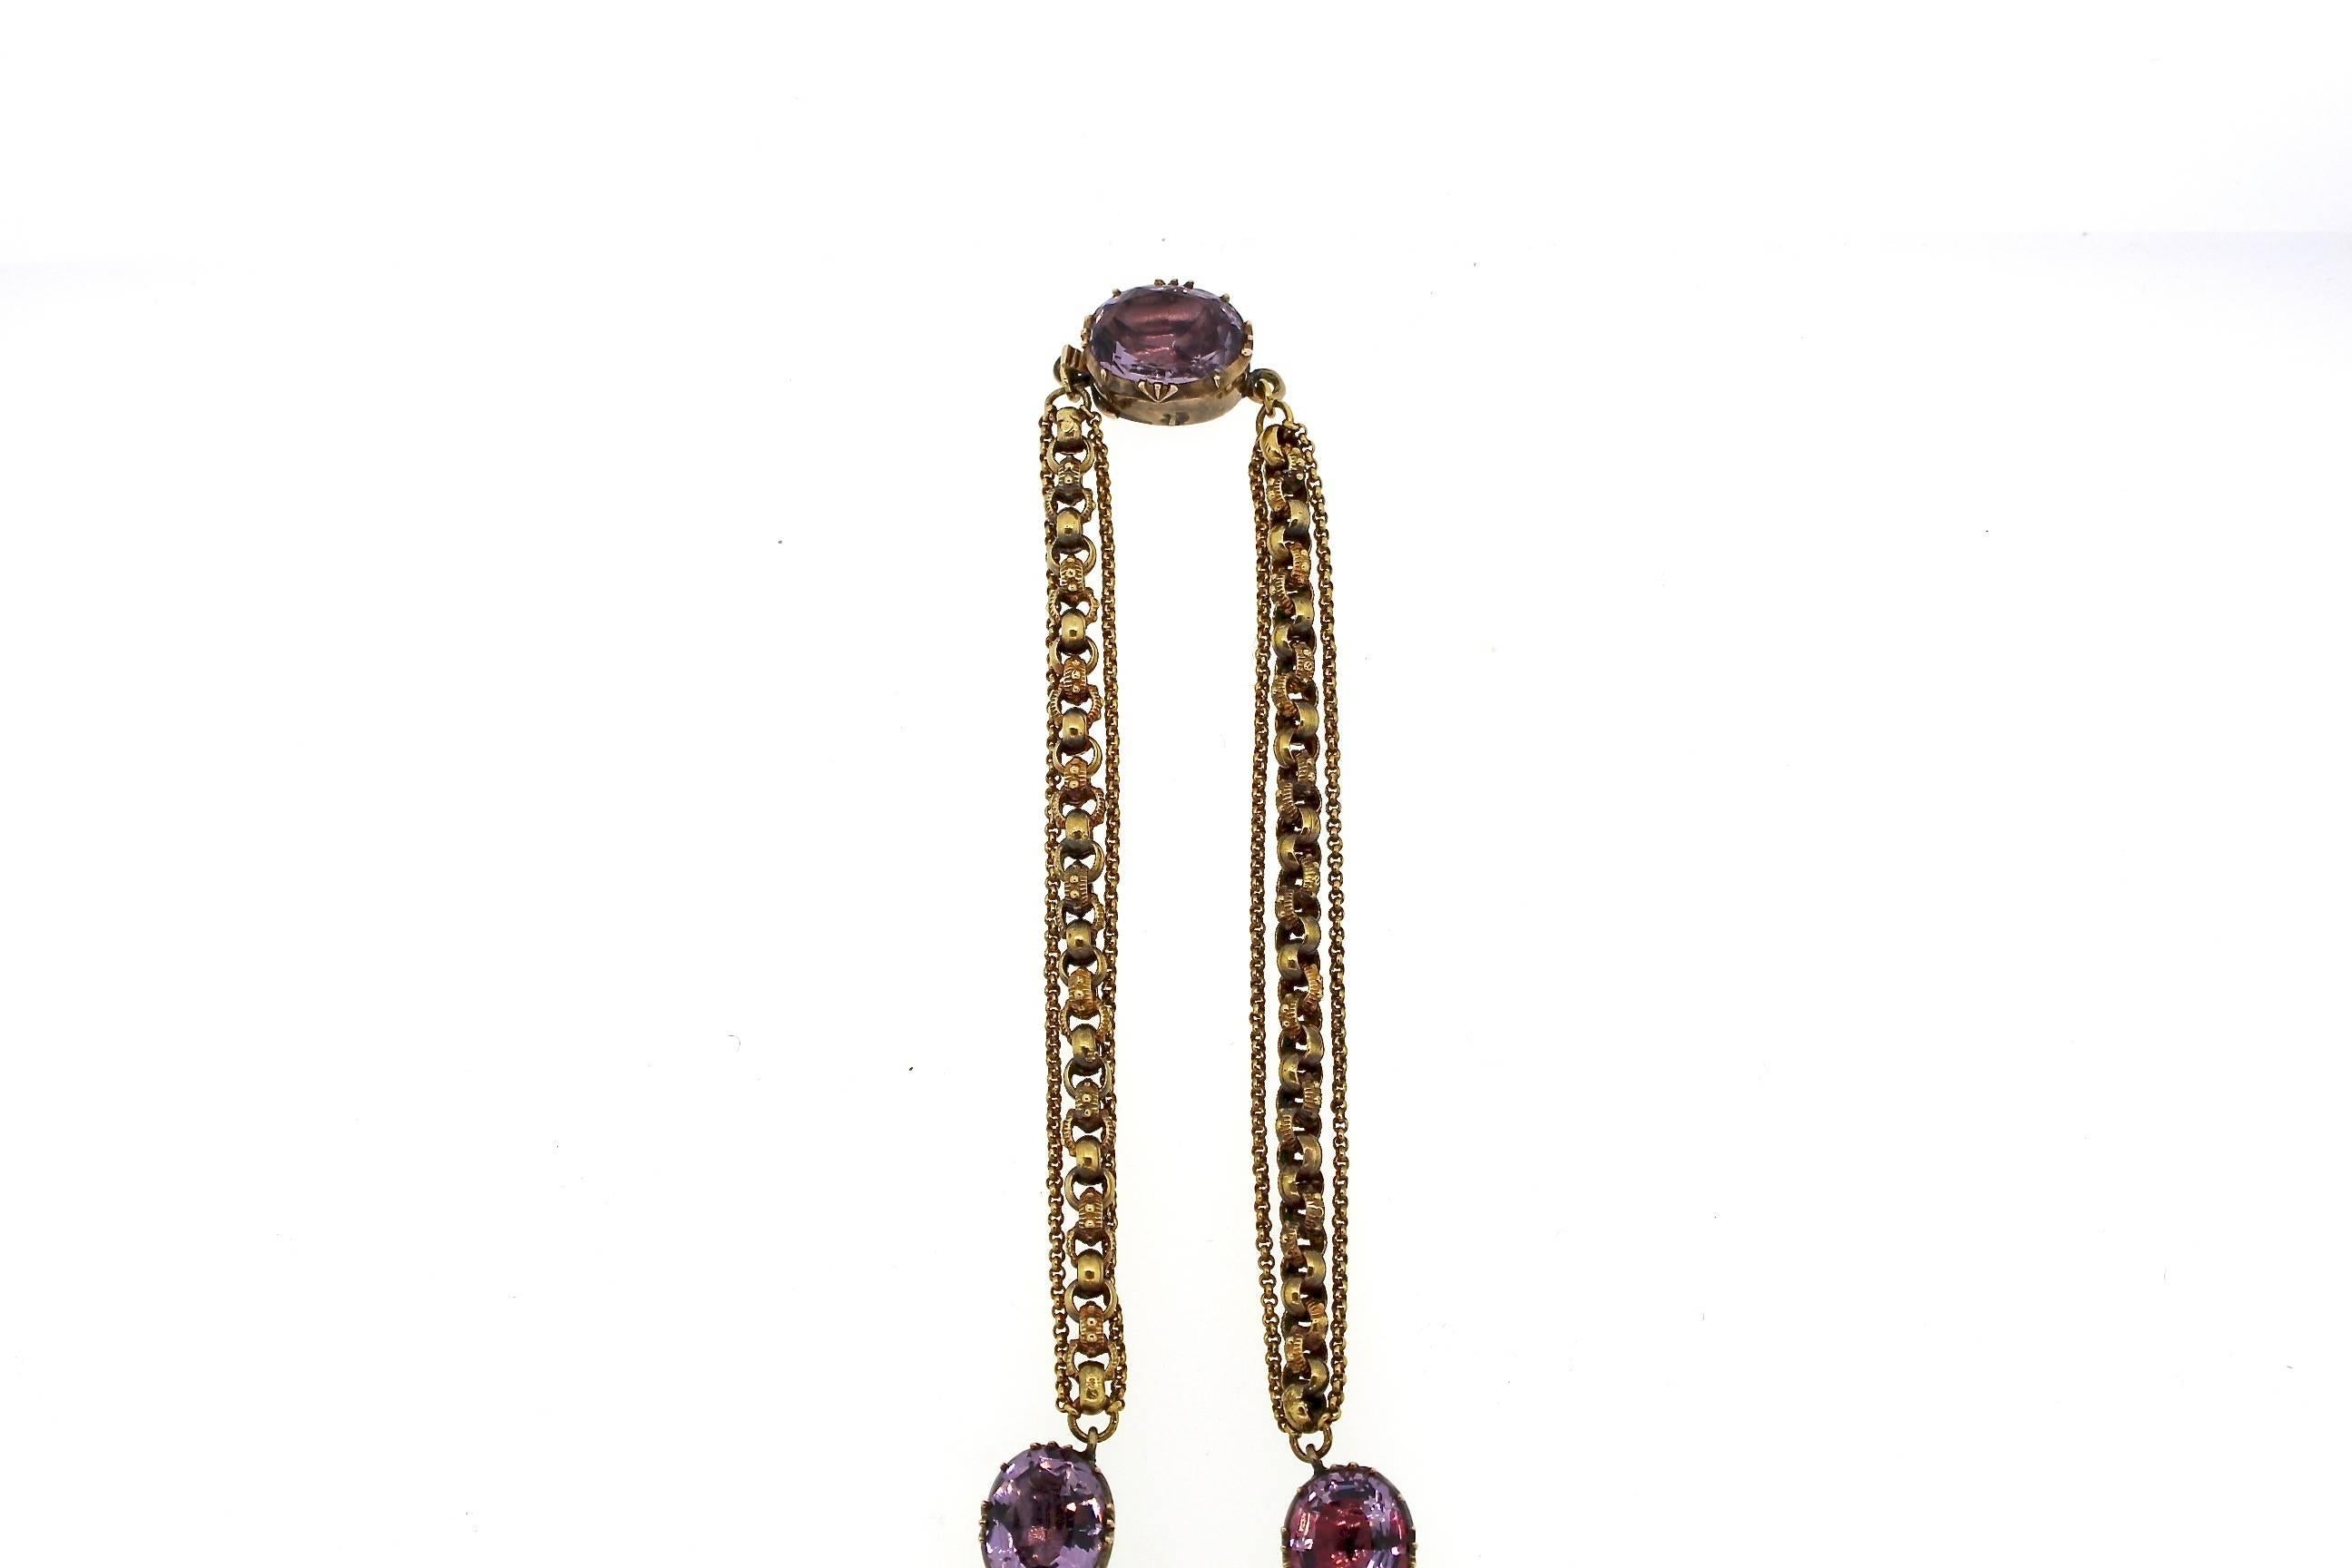 An early Victorian foiled back amethyst maltese cross pin and pendant suspended from a unique chain necklace accented by collet set foiled oval amethysts.  The necklace is 14k gold, and likely made in America around 1850.  The necklace is delicate. 